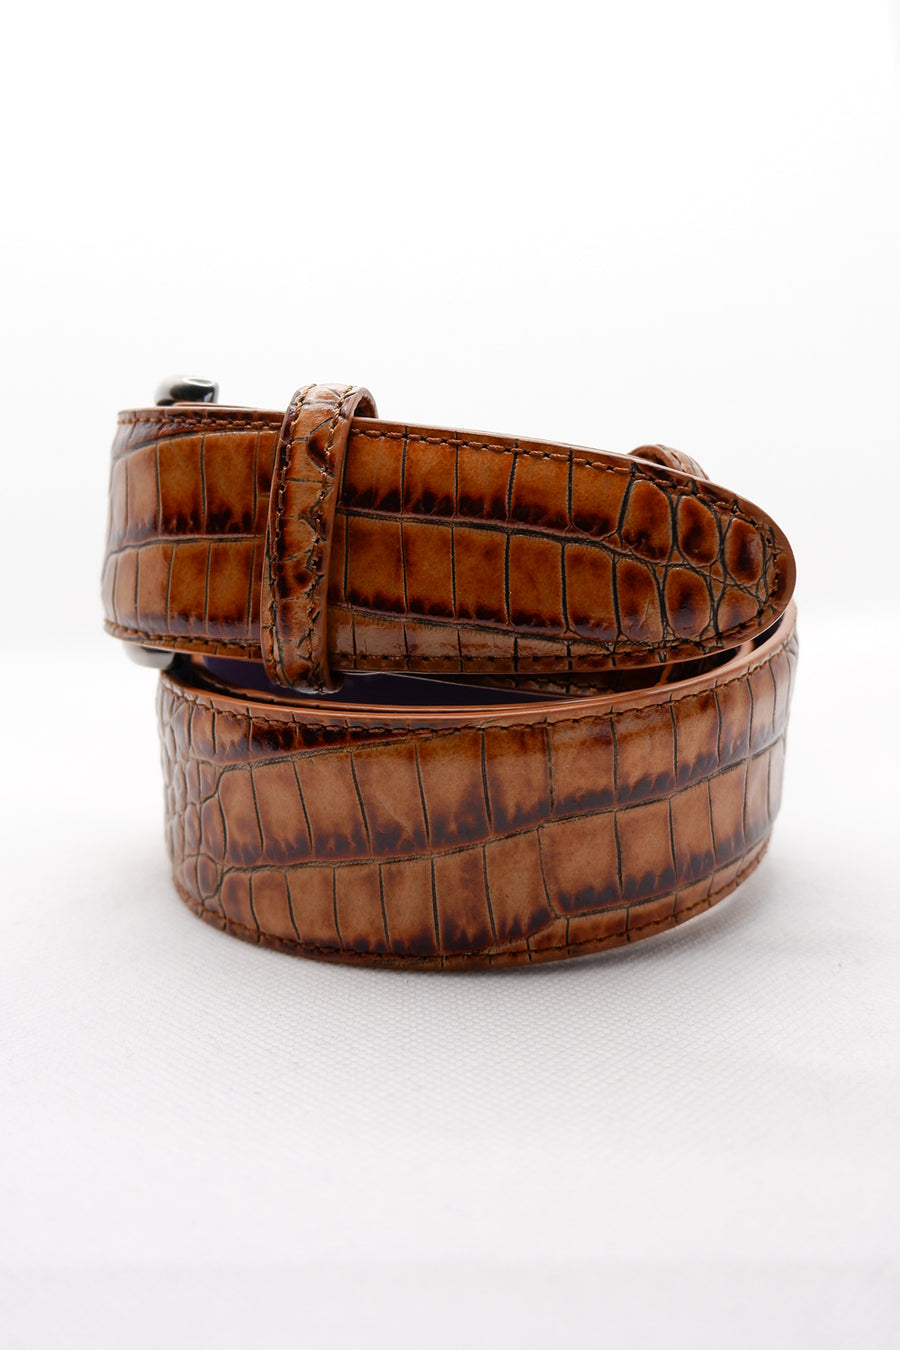 Buy the Elliot Rhodes Mock Croc Belt Brown at Intro. Spend £50 for free UK delivery. Official stockists. We ship worldwide.